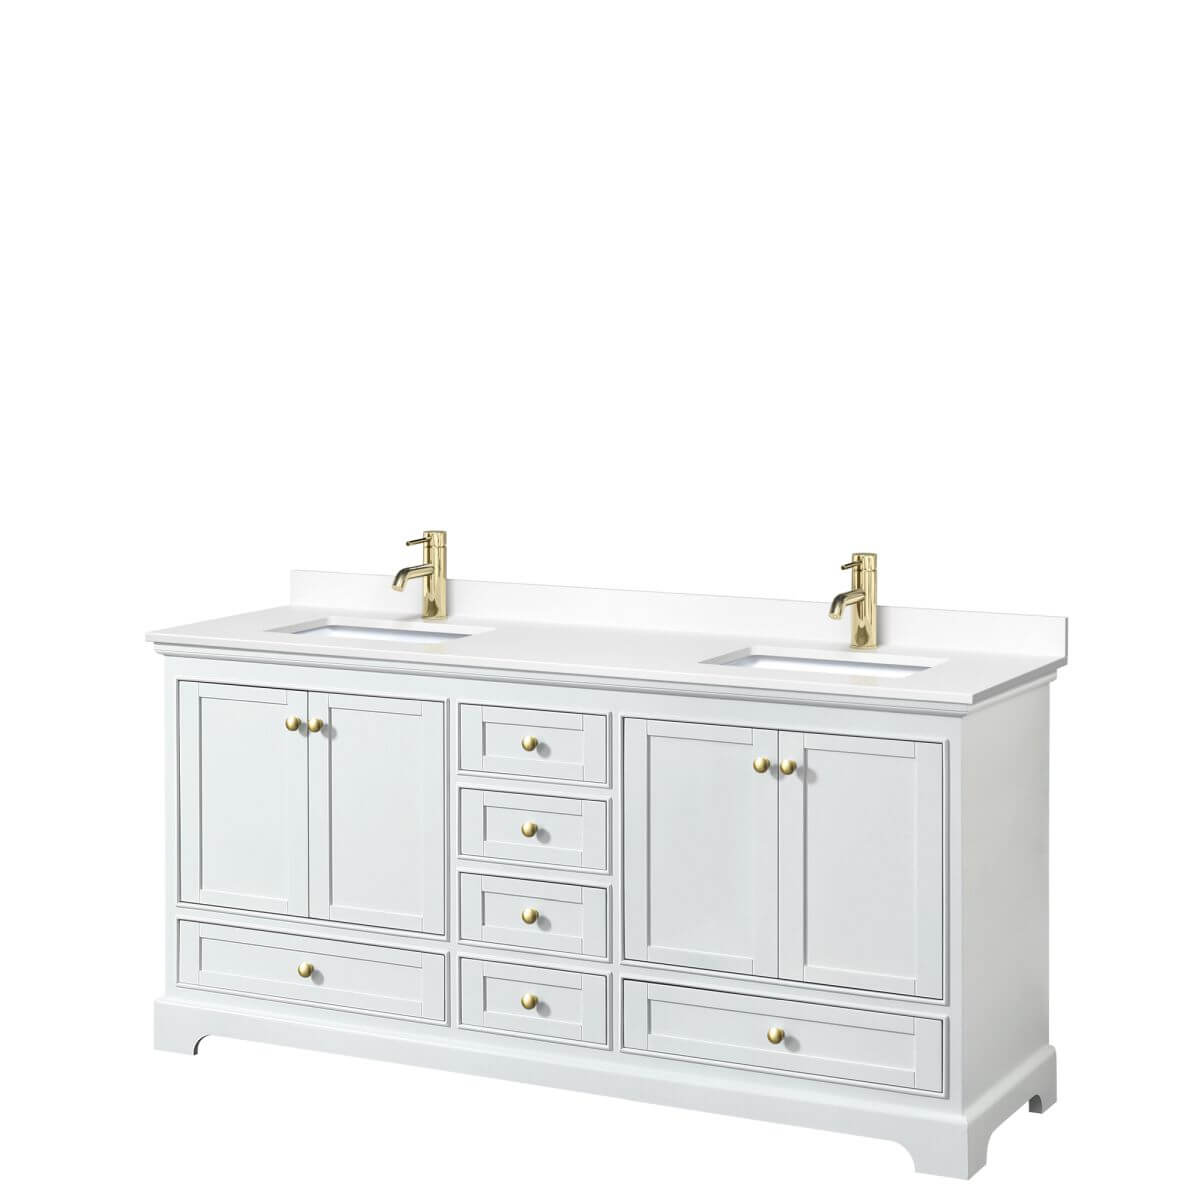 Wyndham Collection Deborah 72 inch Double Bathroom Vanity in White with White Cultured Marble Countertop, Undermount Square Sinks, Brushed Gold Trim and No Mirrors - WCS202072DWGWCUNSMXX